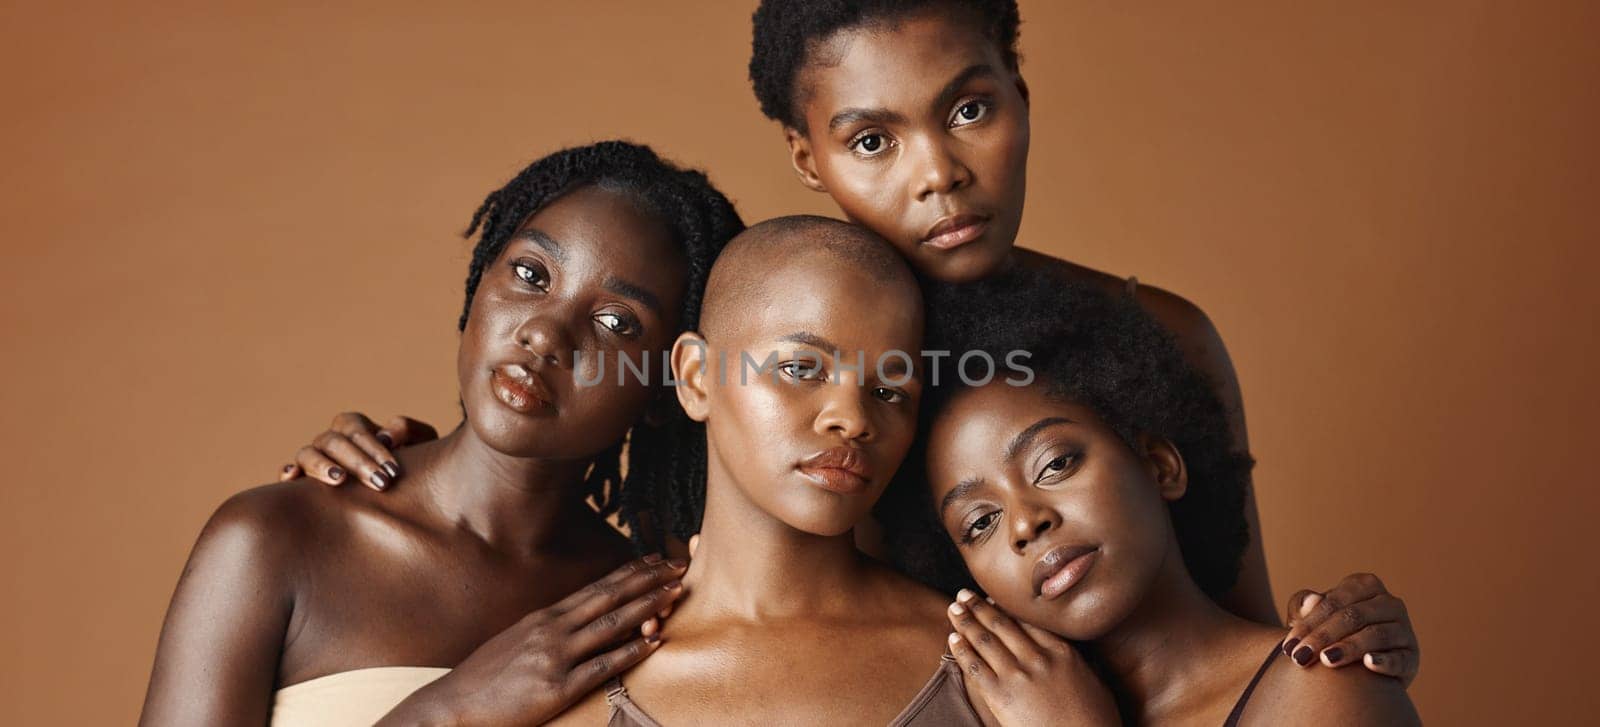 Skincare, face or happy black women models with glowing skin isolated on brown background. Facial dermatology, diversity or beauty cosmetics for makeup in studio with girl friends or African people.